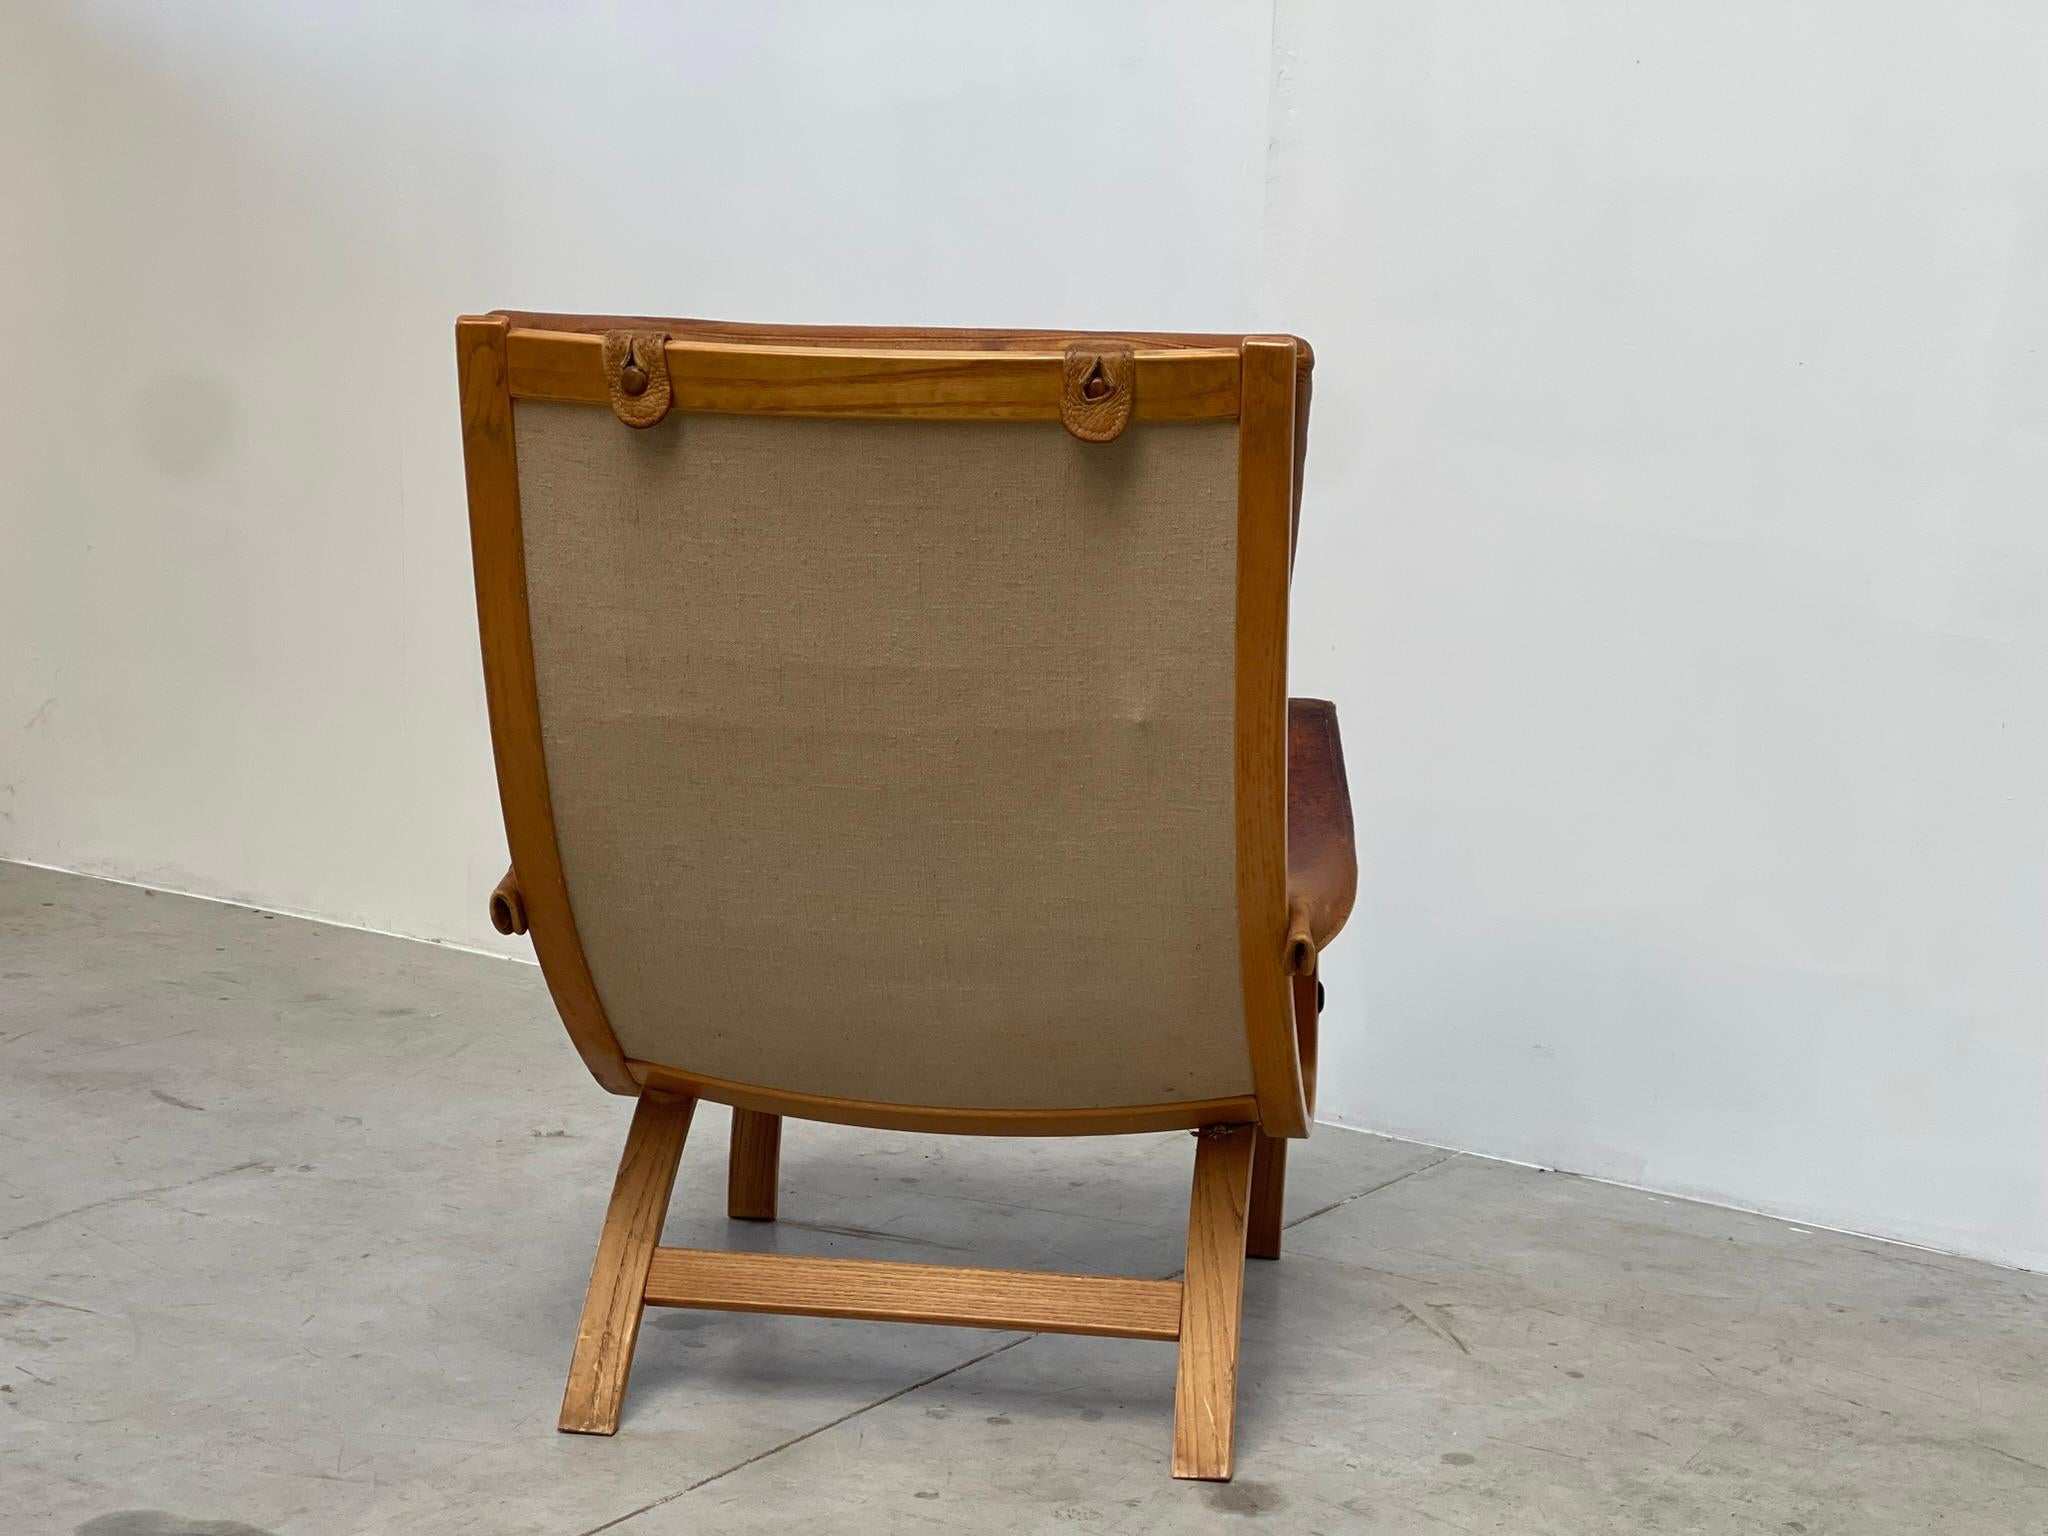 Elegant bentwood armchair by Soren Nissen & Ebbe Gehl model 'Clipper'.

Gorgeous bentwood frame with beautifully patinated leather cushions and armrests.

In short: A fantastic chair for any vintage lover.

1970s - Denmark

Dimensions:
Height: